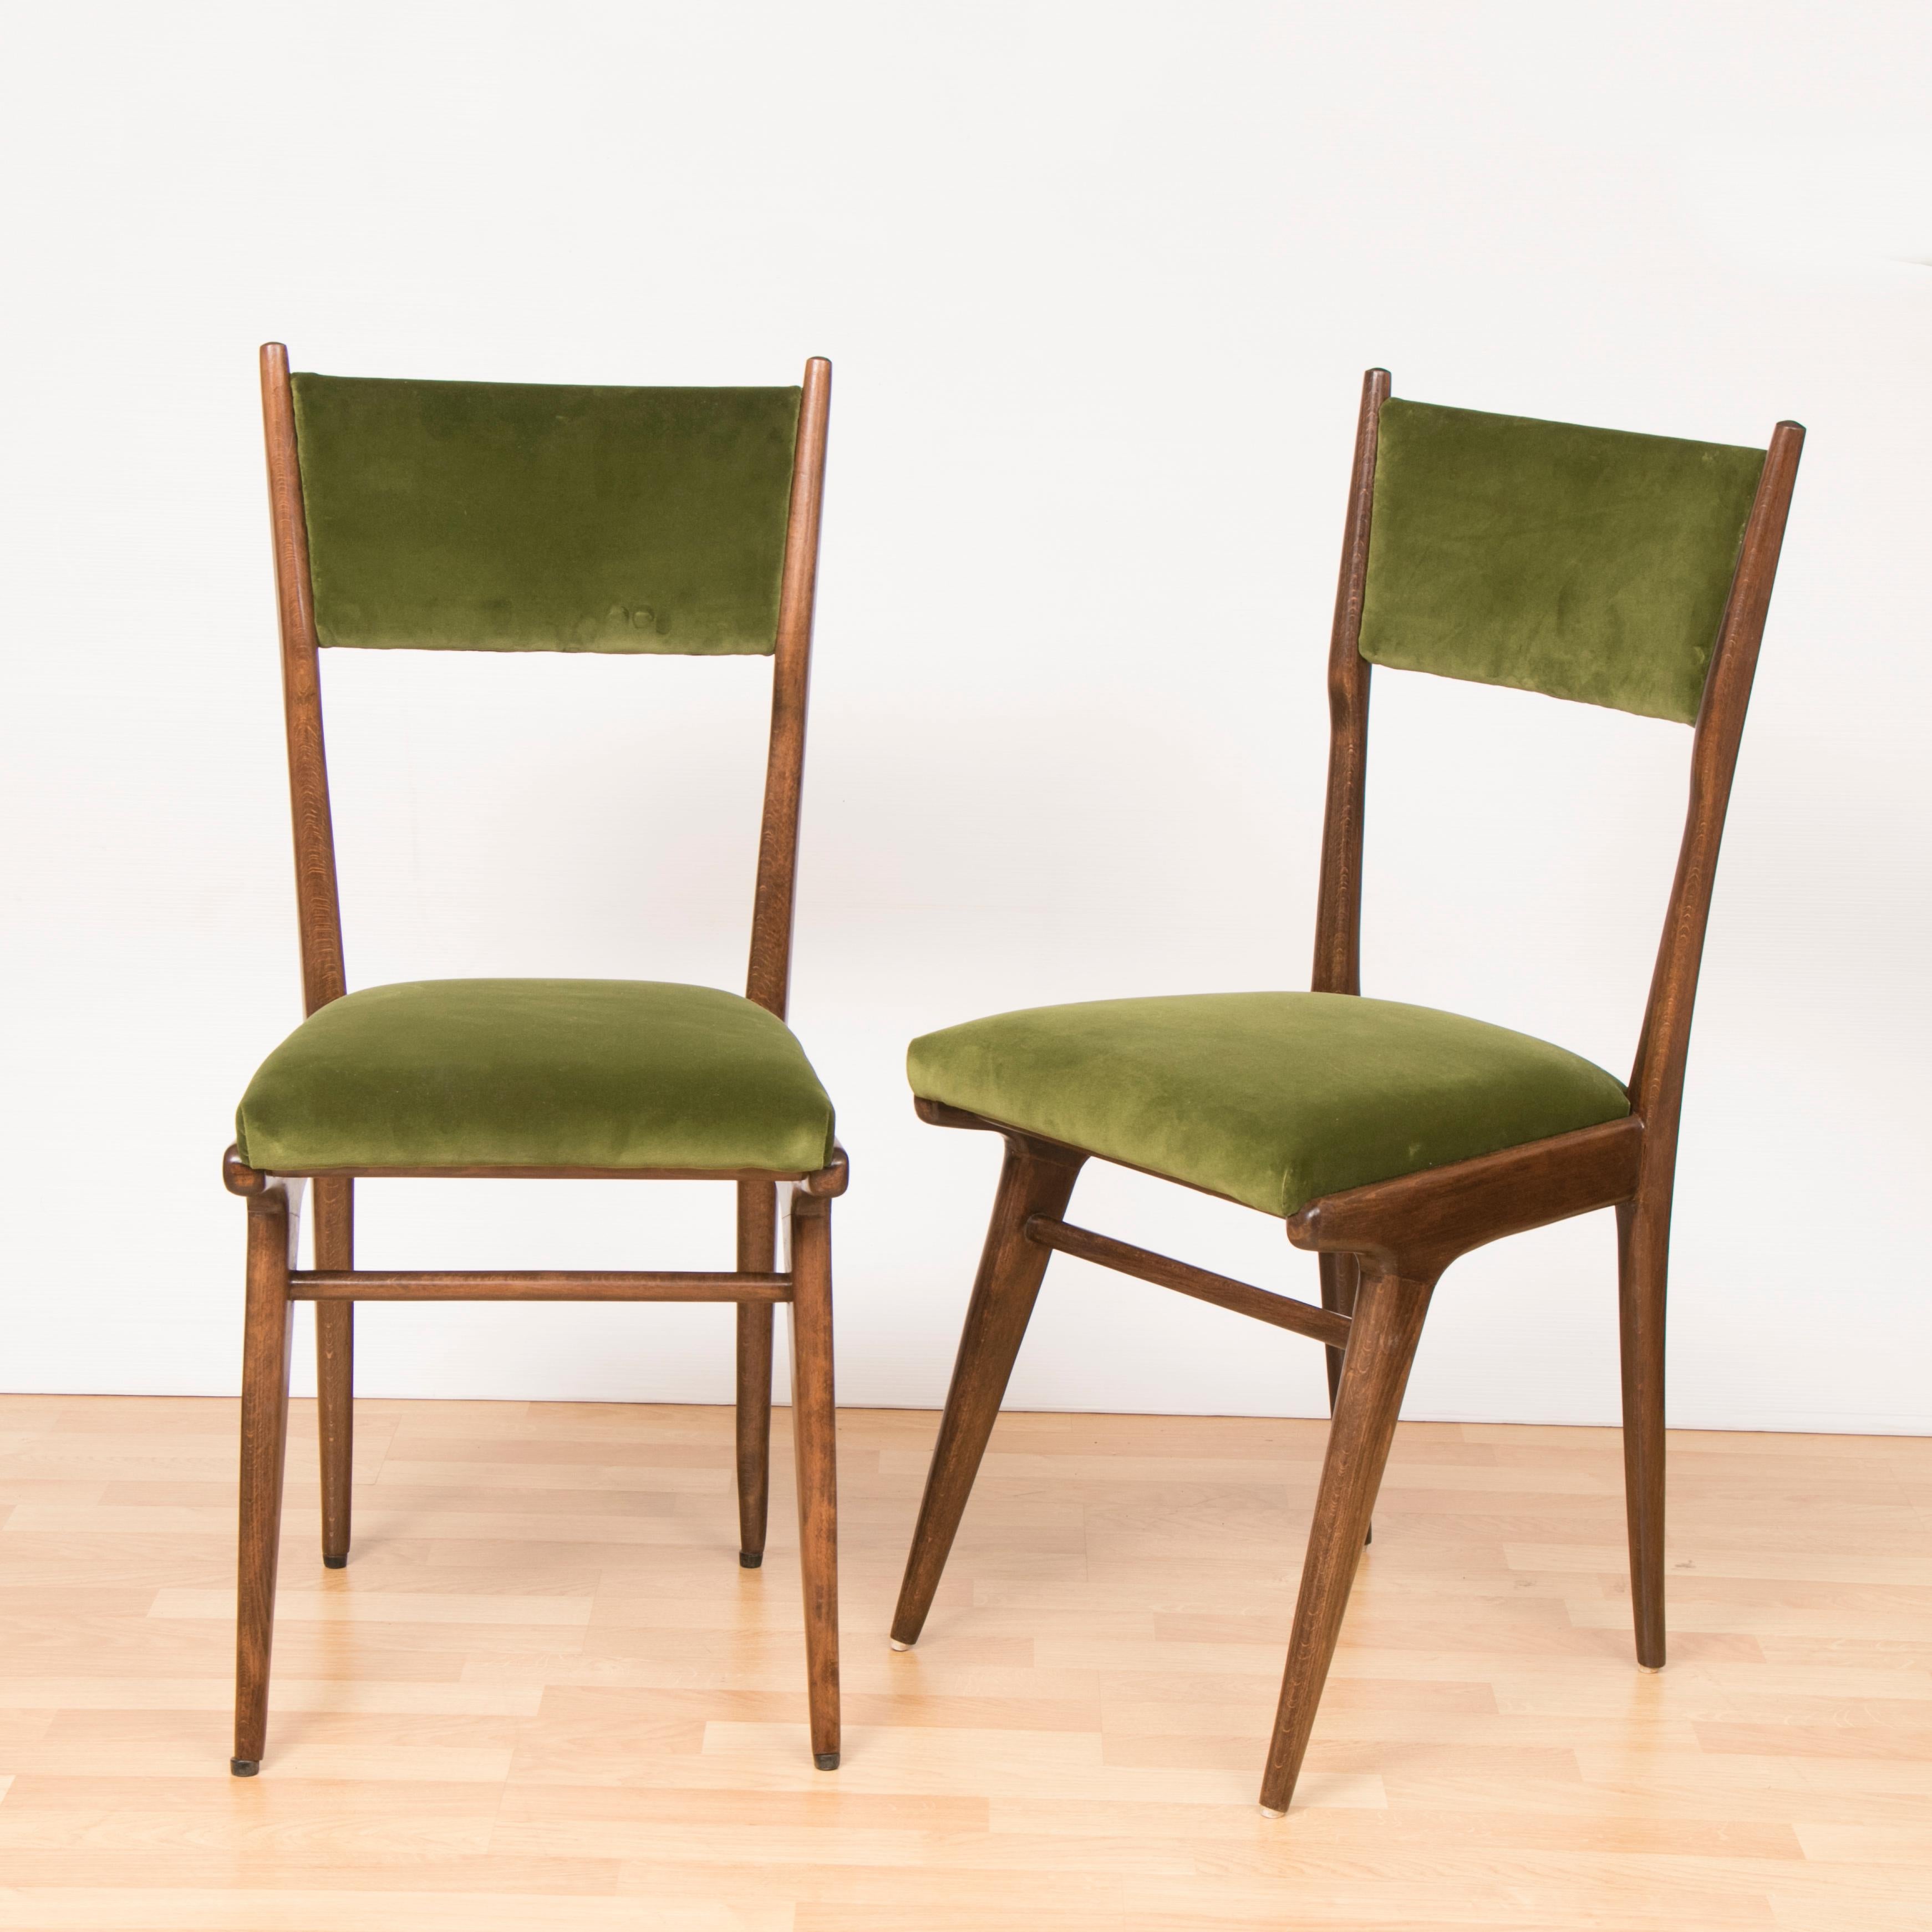 1950s set of six Italian Ico Parisi, high-backed, Walnut sculptural dining chairs recovered in Romo Groups Kirkby Design Ice Olive velvet. The chairs consist of a sculptural frame with deep padded seat and backrest which curves upwards to create a